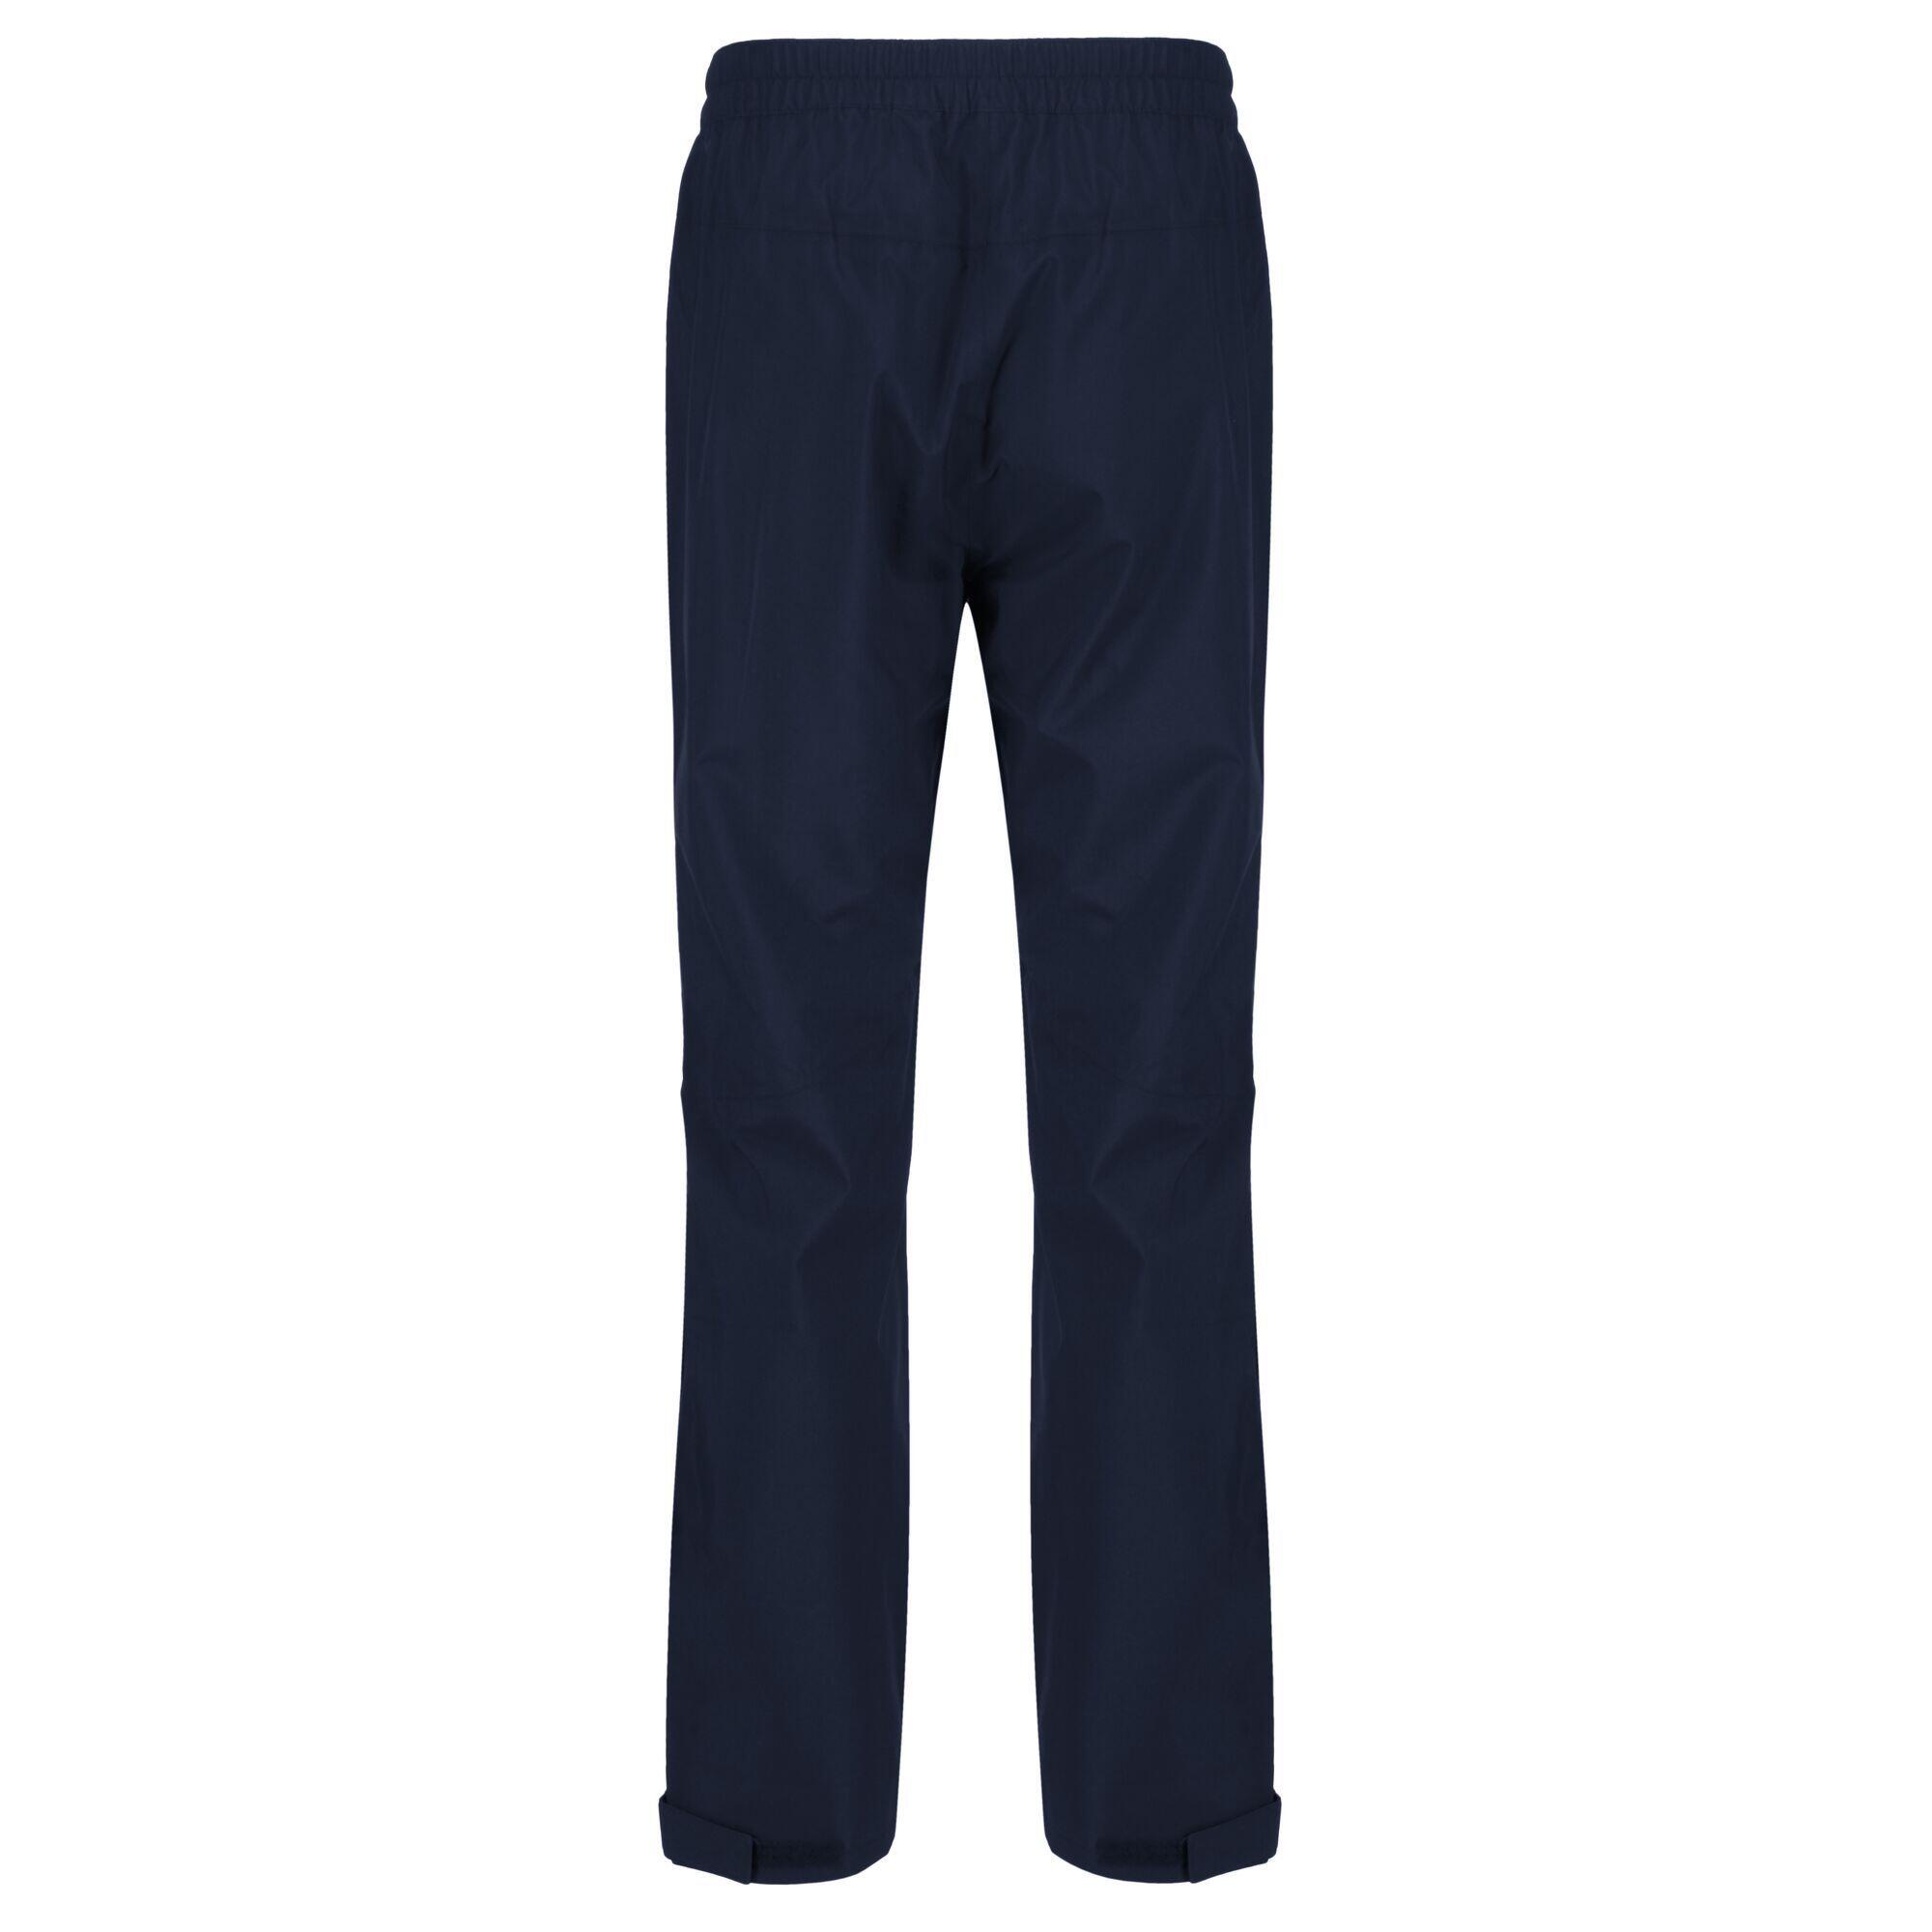 Mens Highton Stretch Overtrousers (Navy) 2/5